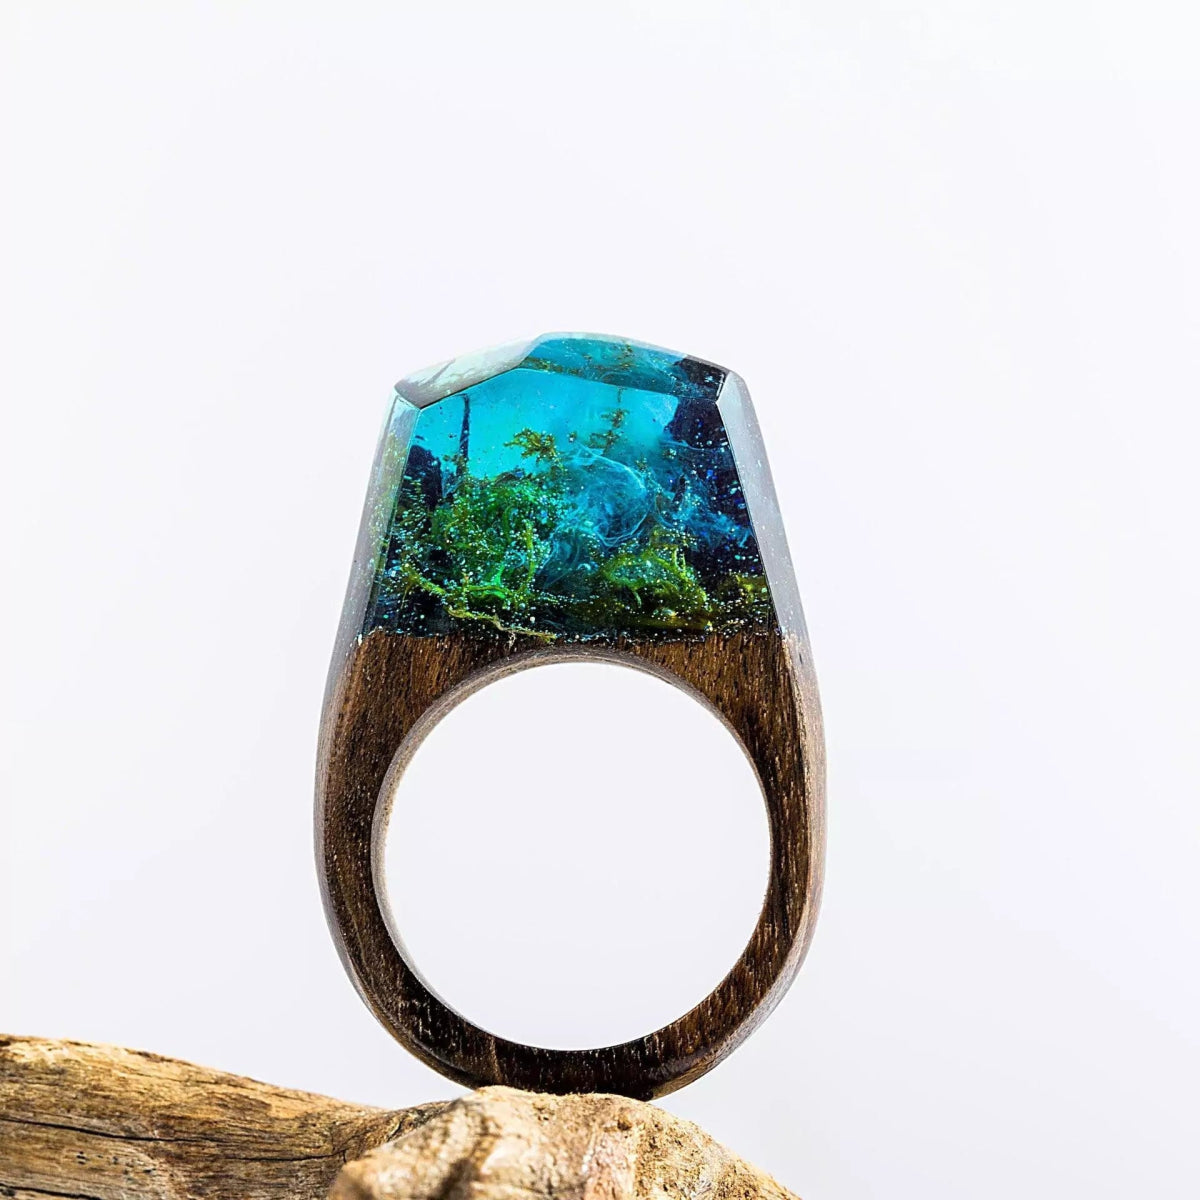 Vintage Enchanted Forest Mystical Wooden Ring - HigherFrequencies